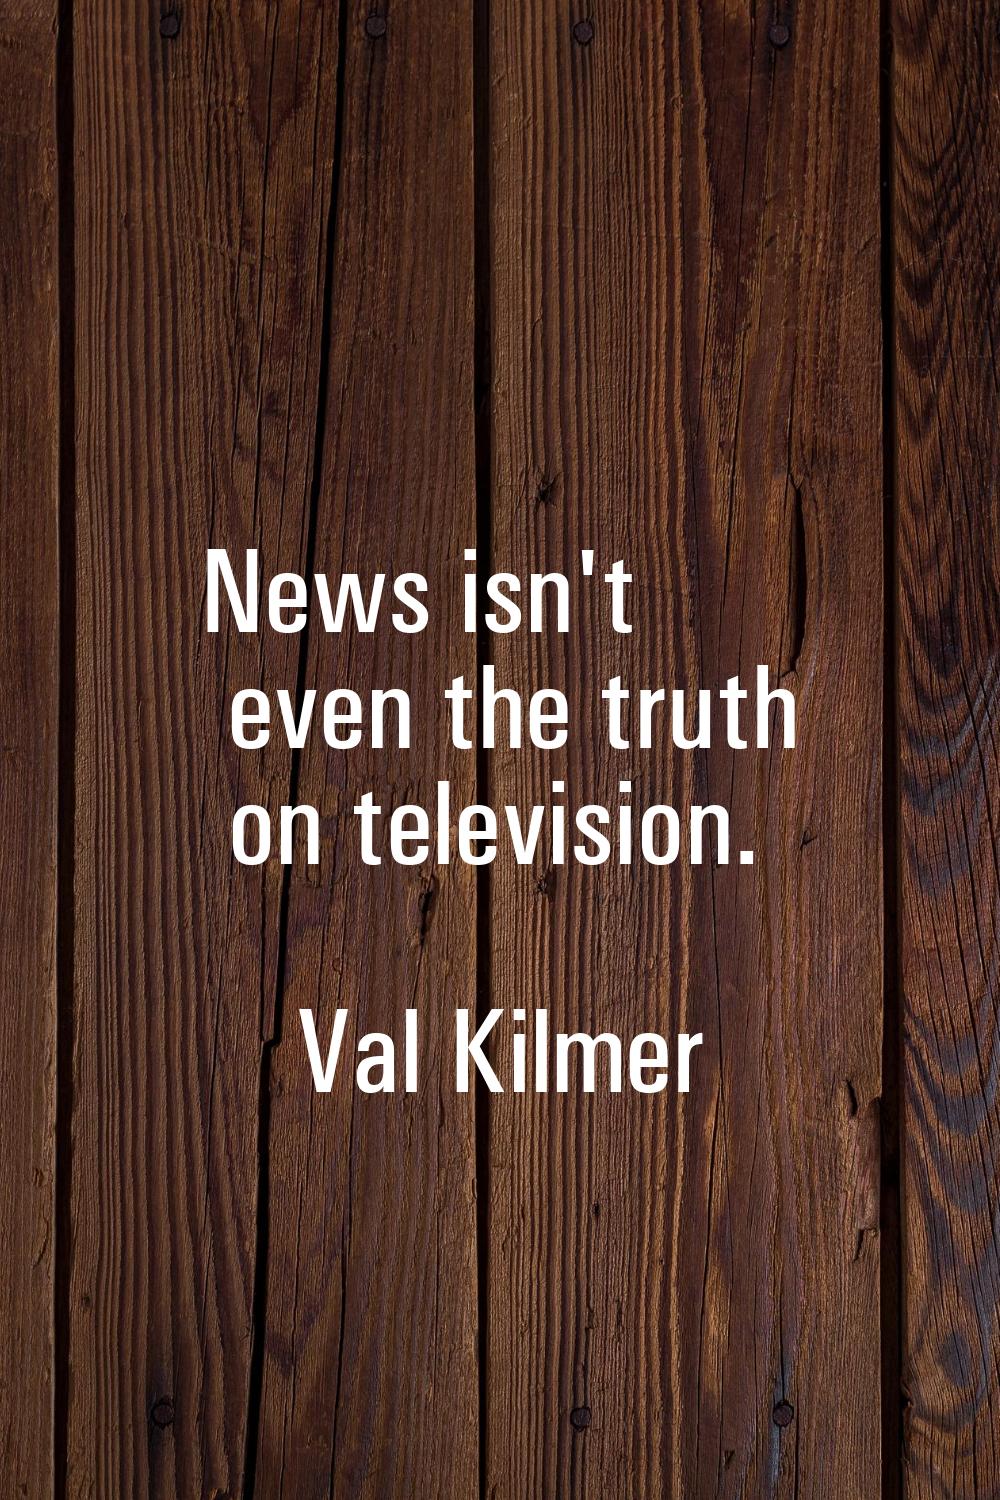 News isn't even the truth on television.